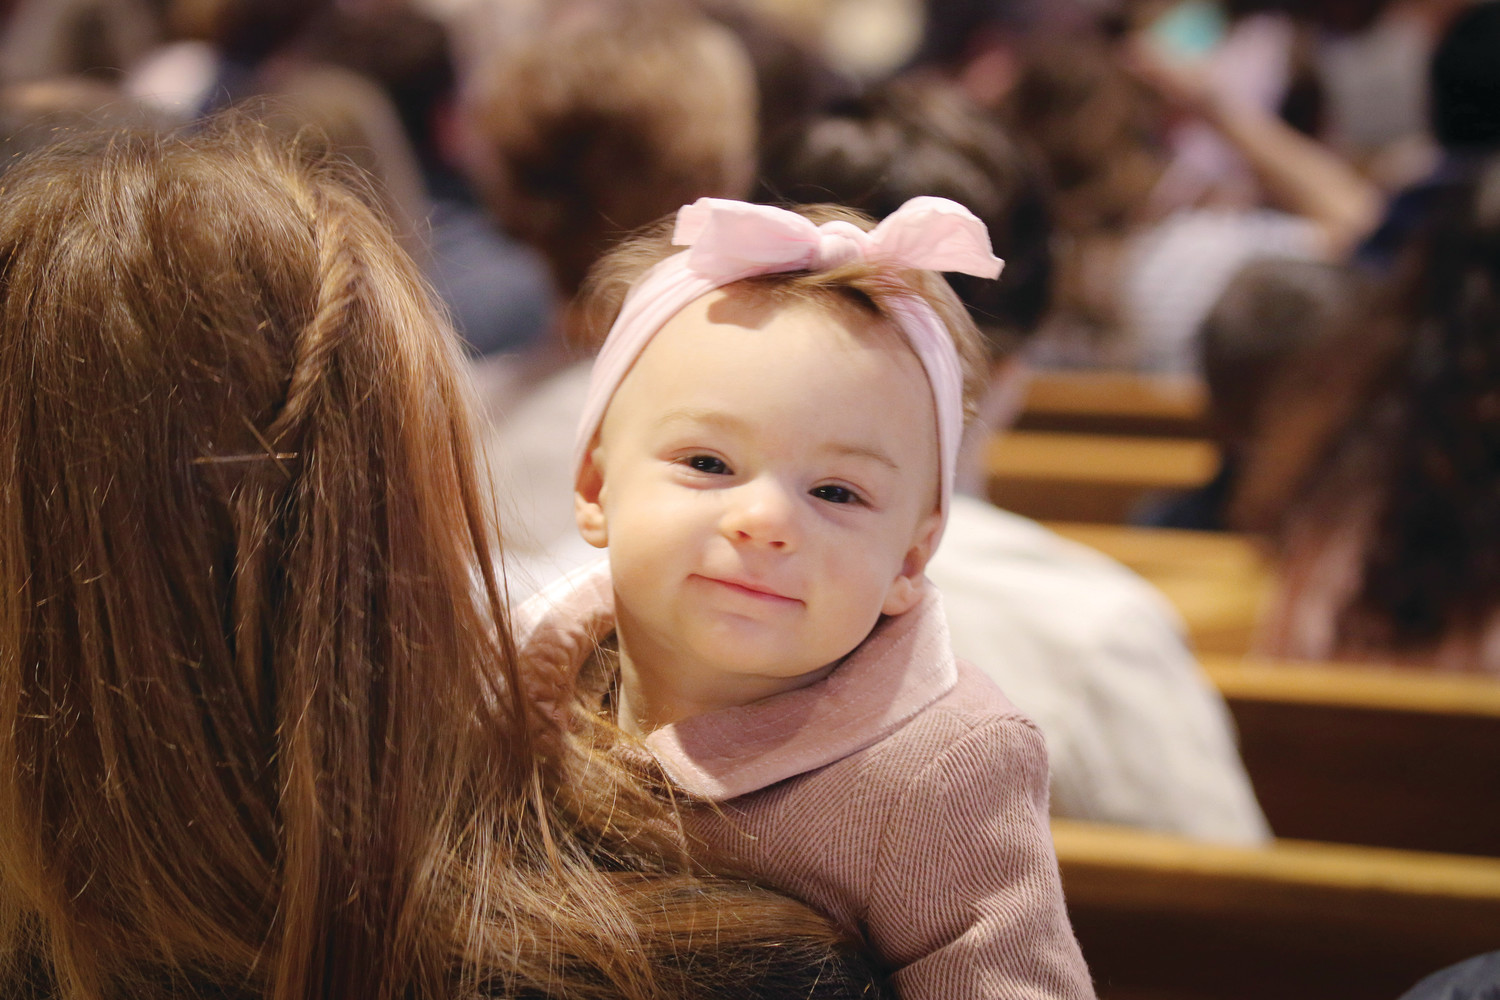 The smiling face of Angelina lights up the cathedral on Easter.